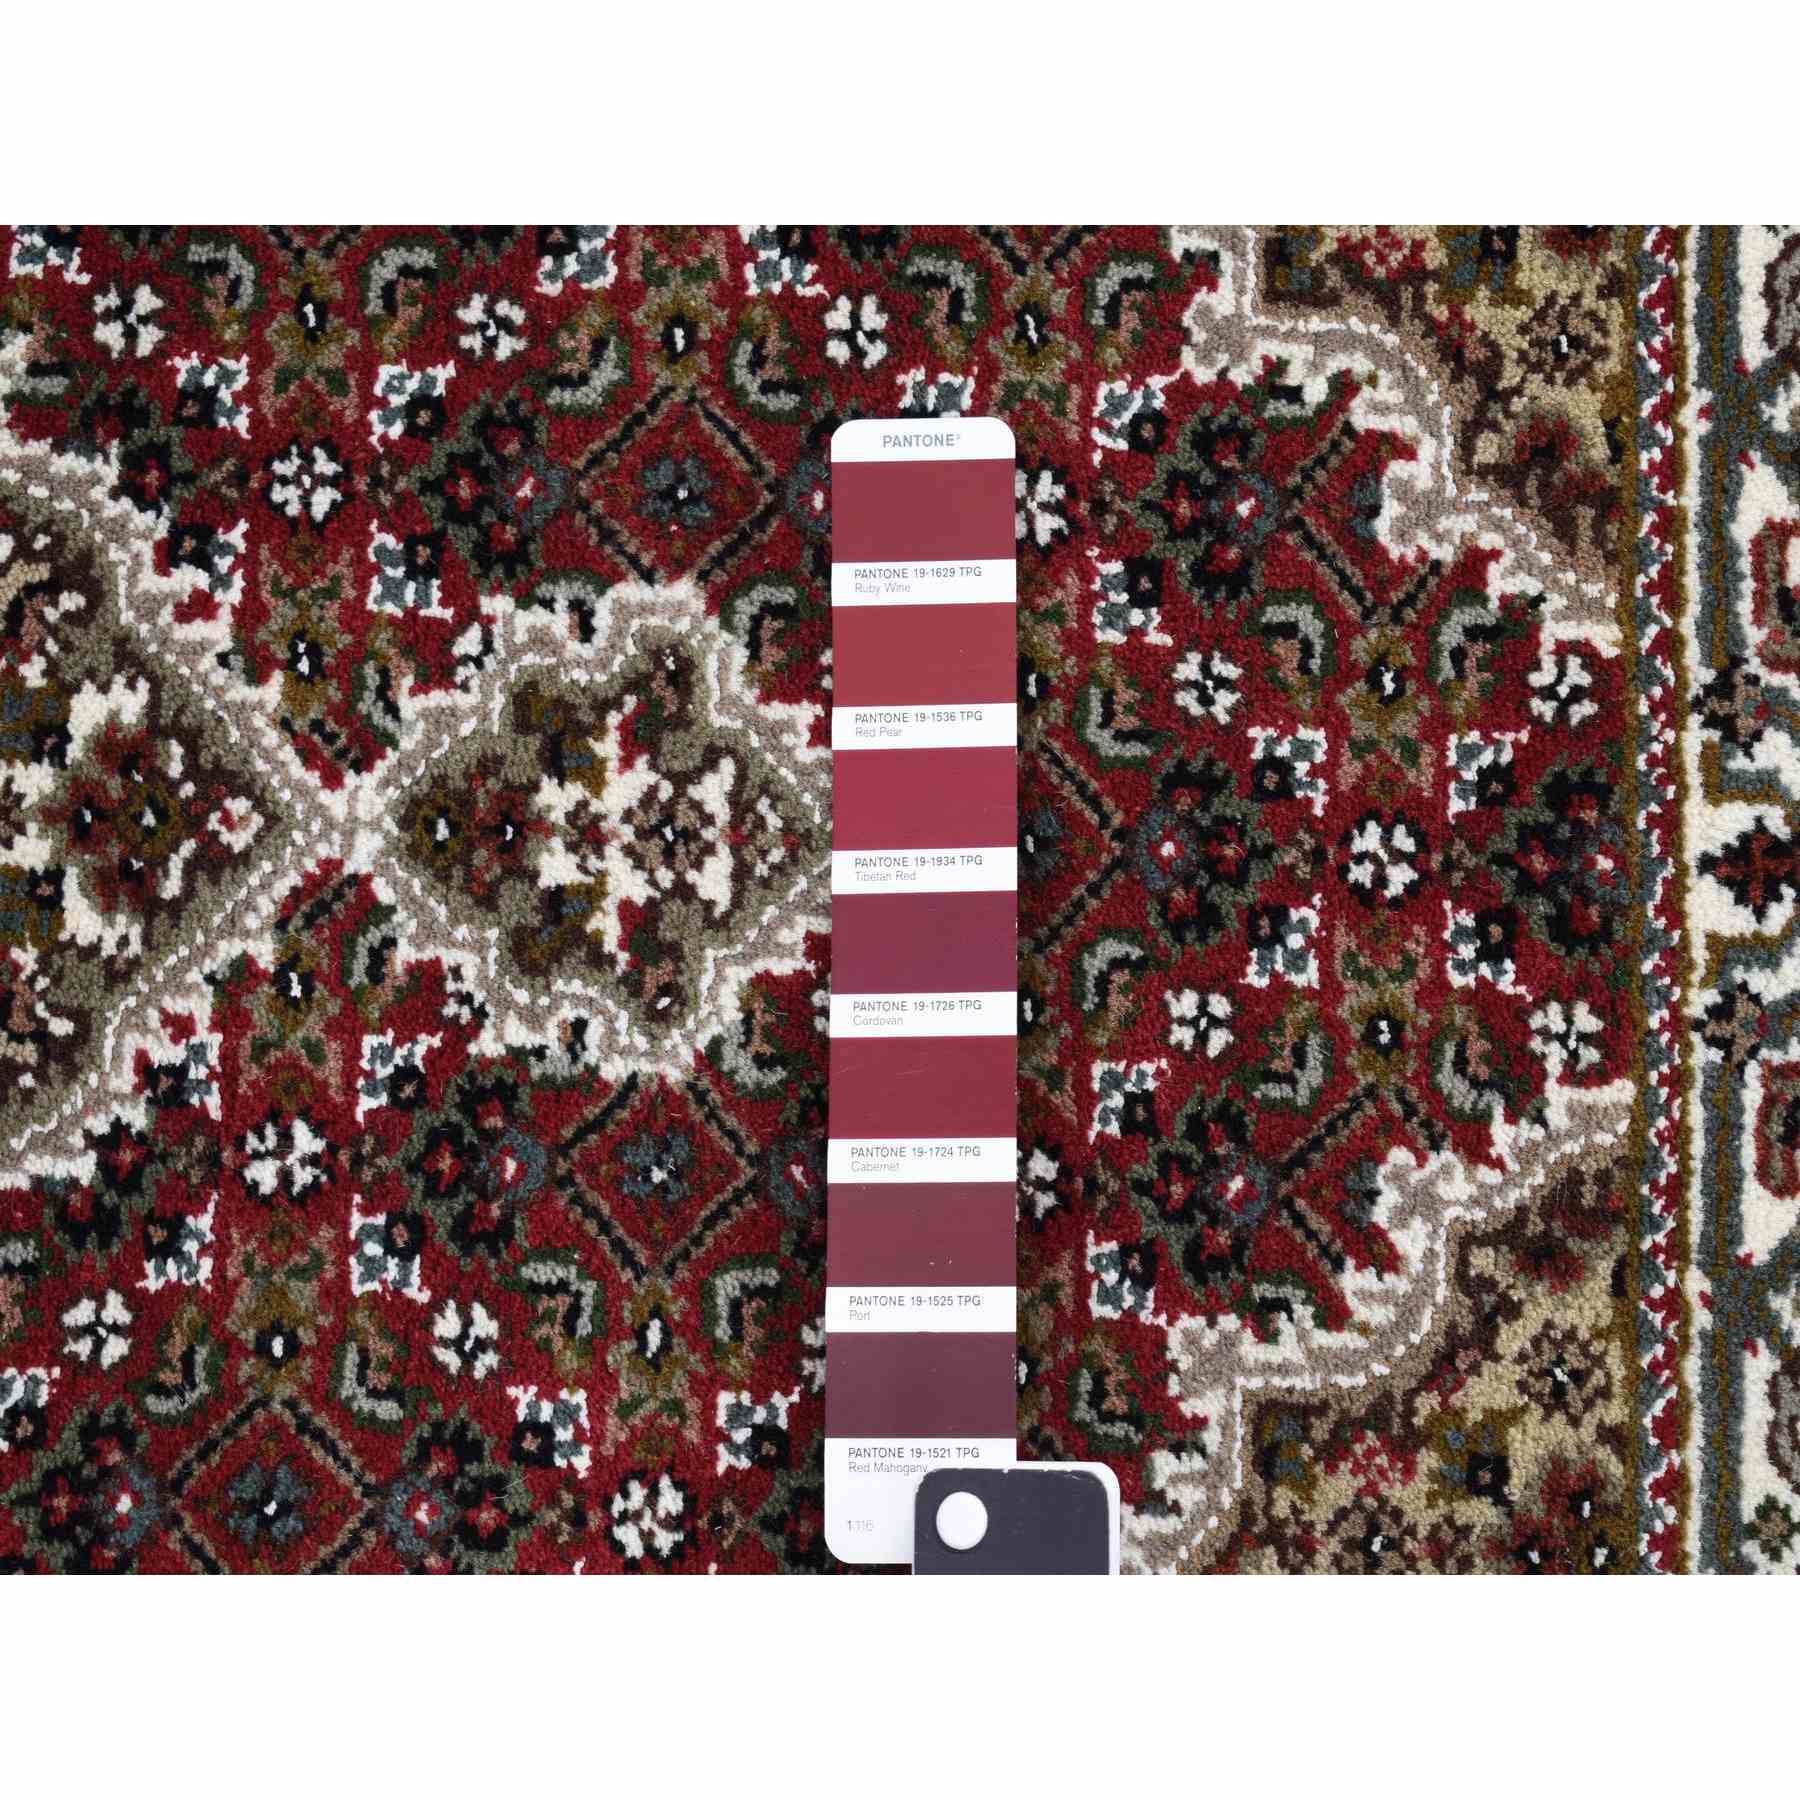 Fine-Oriental-Hand-Knotted-Rug-390020